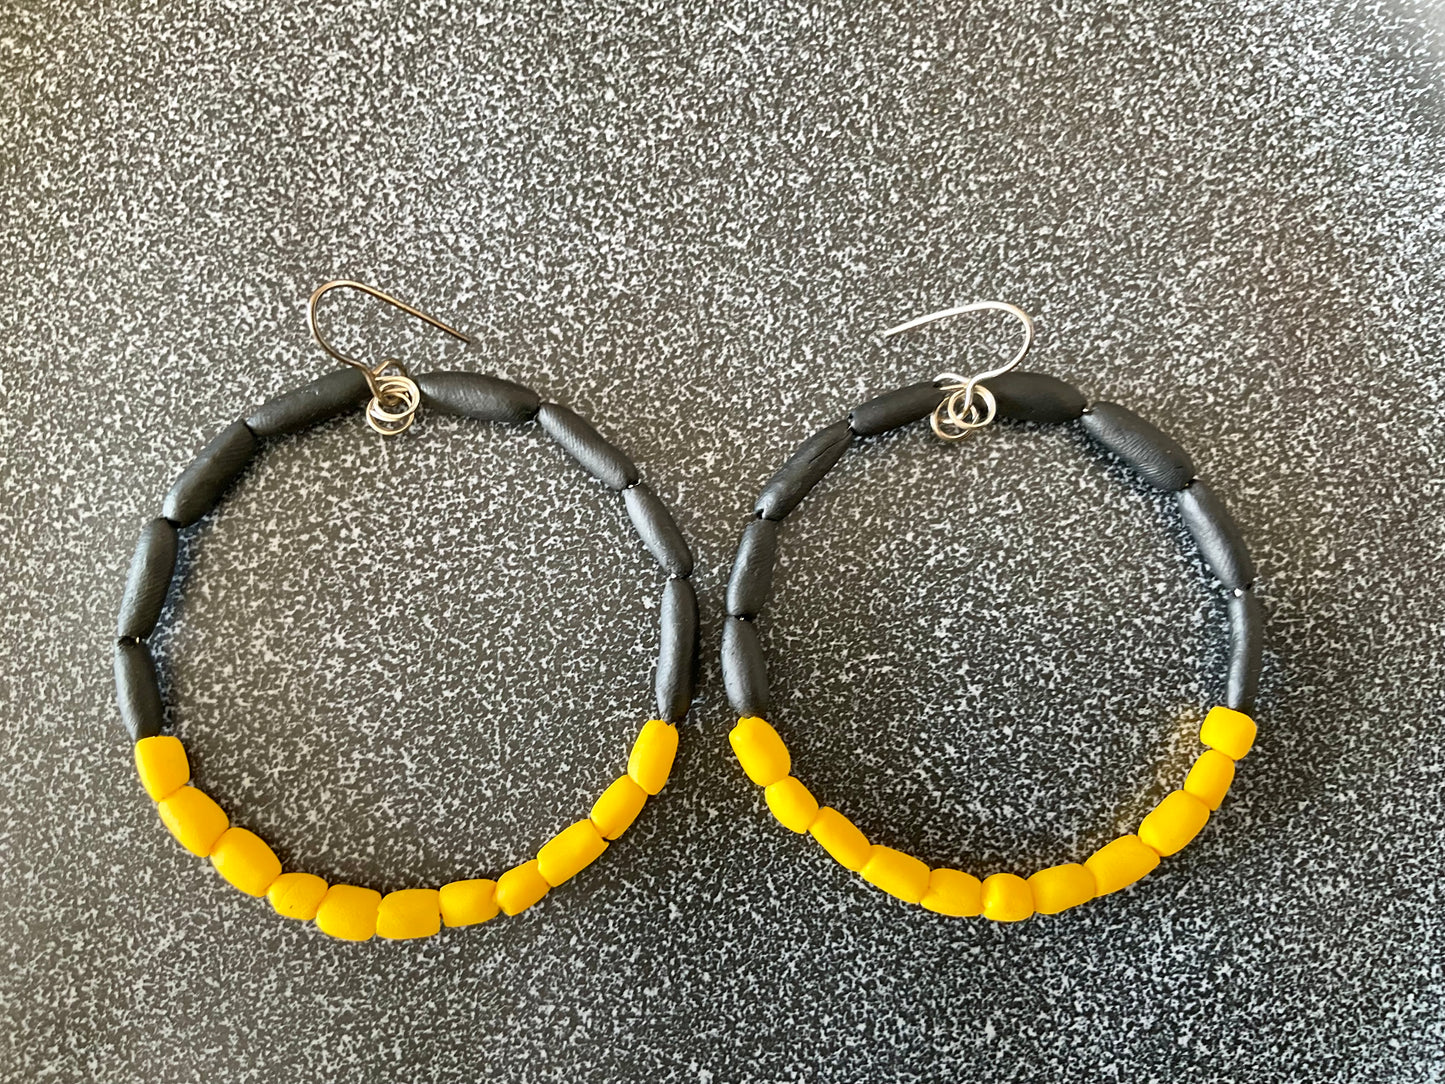 Hand rolled clay earrings - Black + sunflower